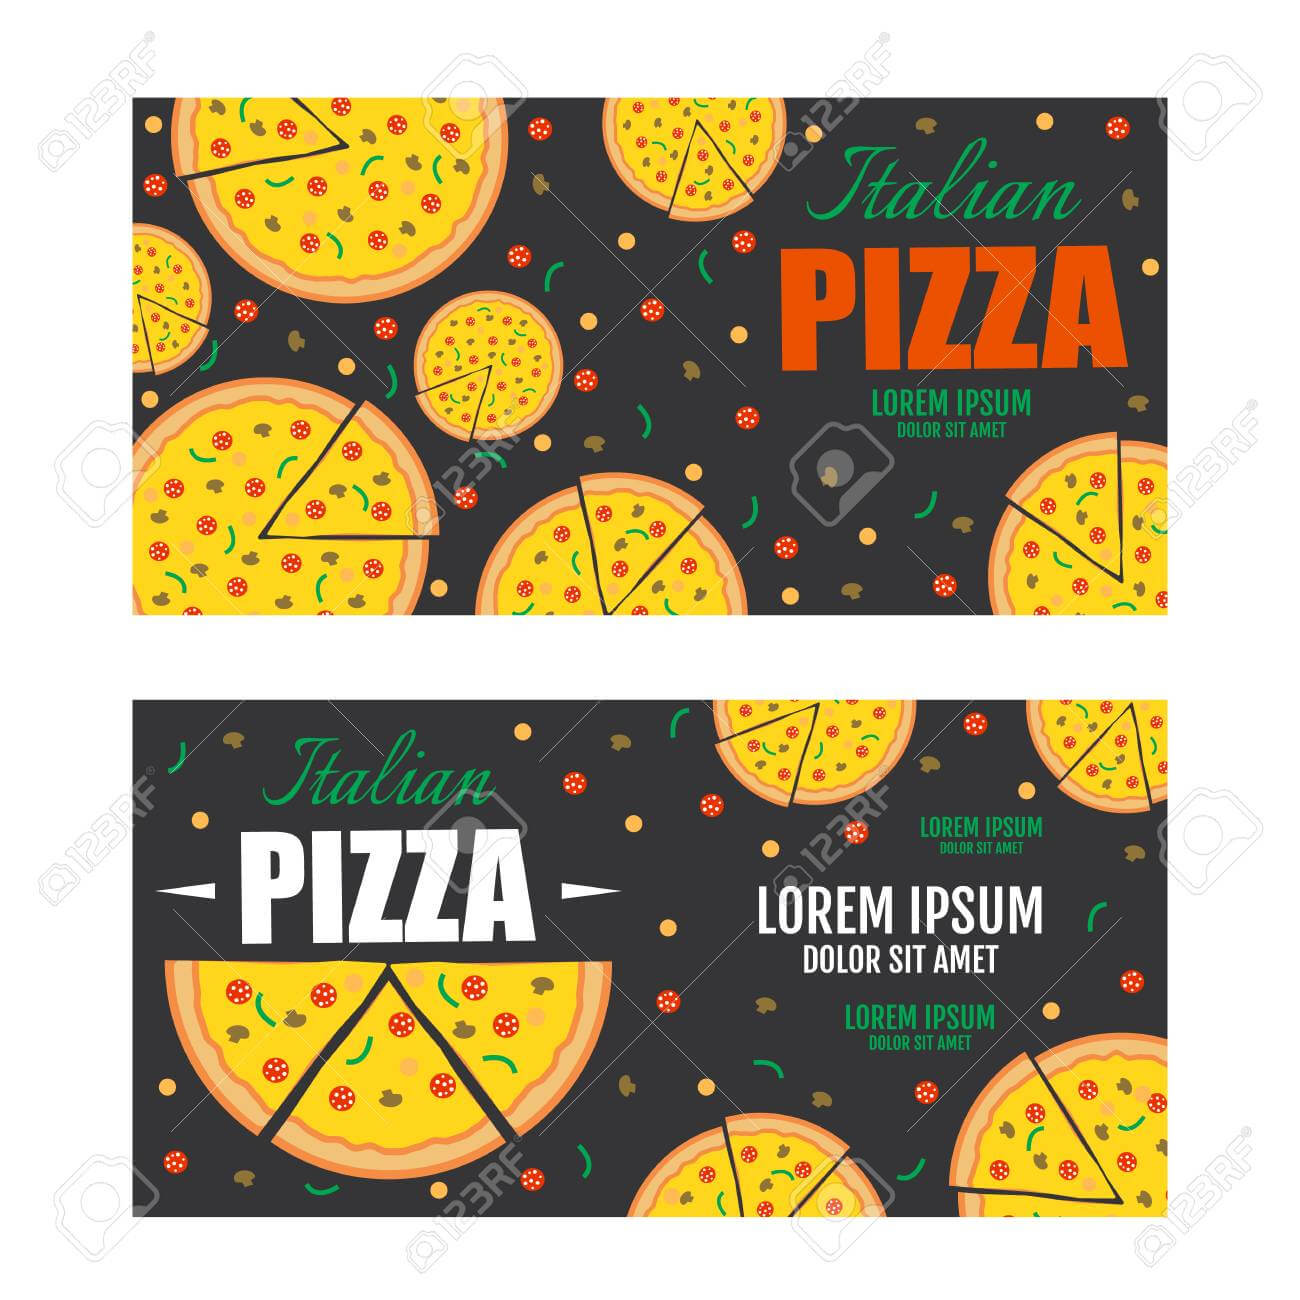 Pizza Flyer Vector Template. Two Pizza Banners. Gift Voucher With Regard To Pizza Gift Certificate Template